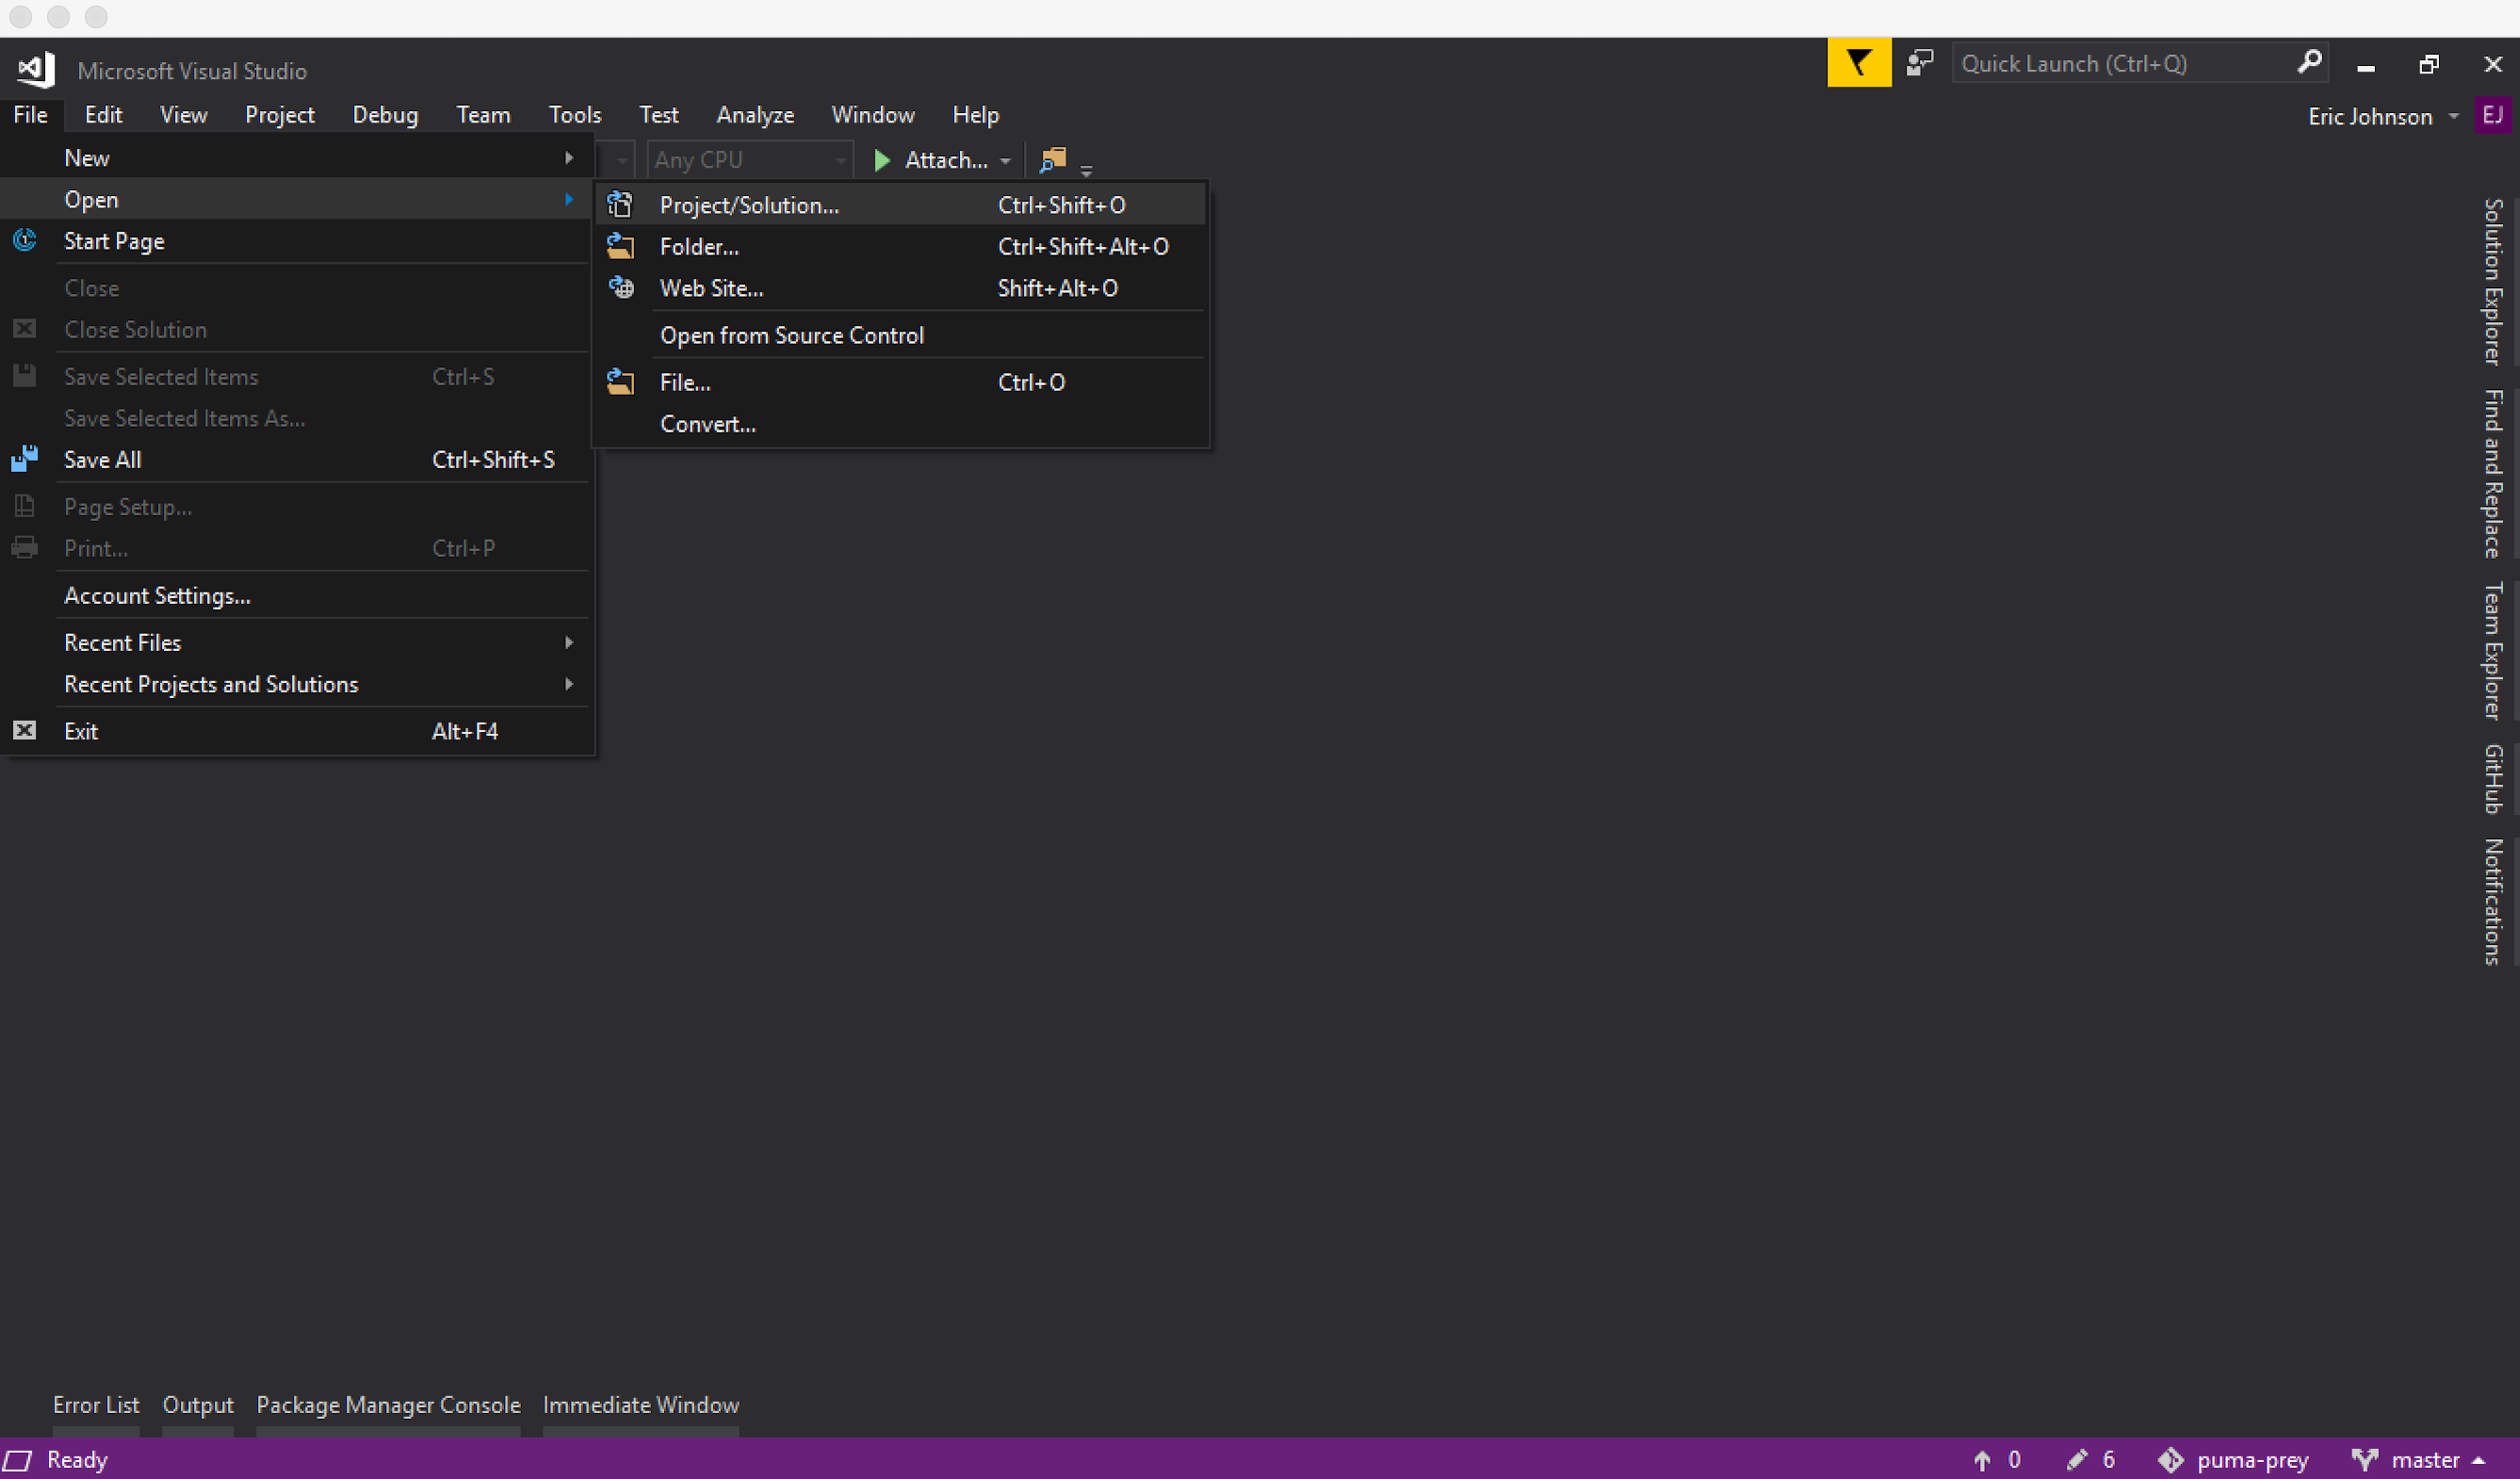 Open your project in Visual Studio